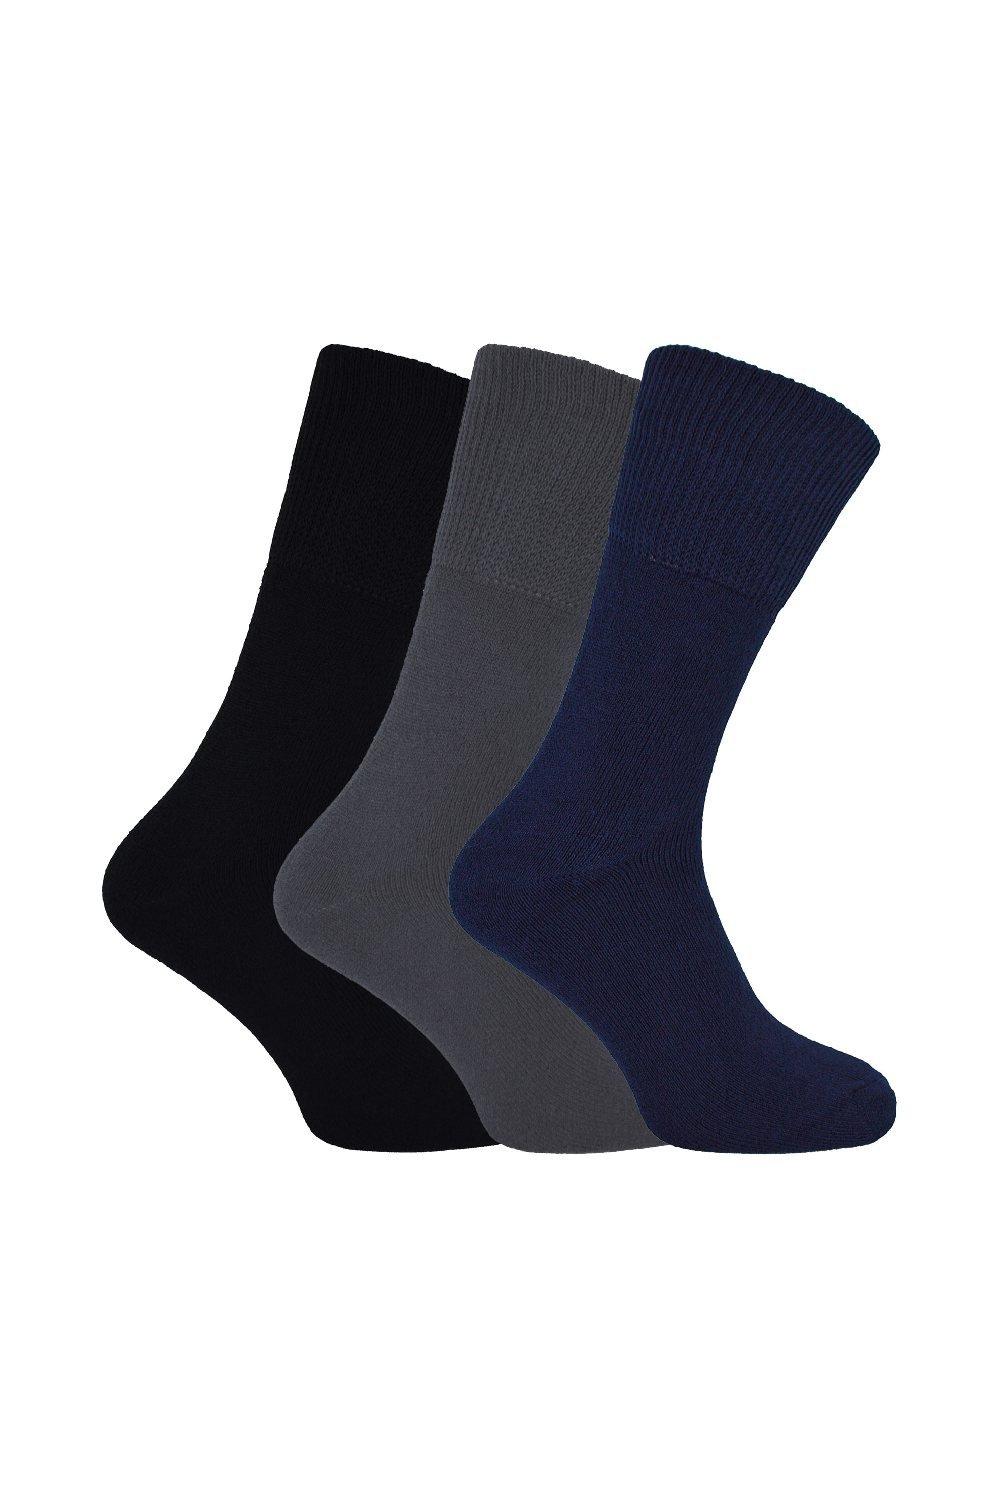 3 Pairs Thick Soft Bamboo Thermal Socks for Winter